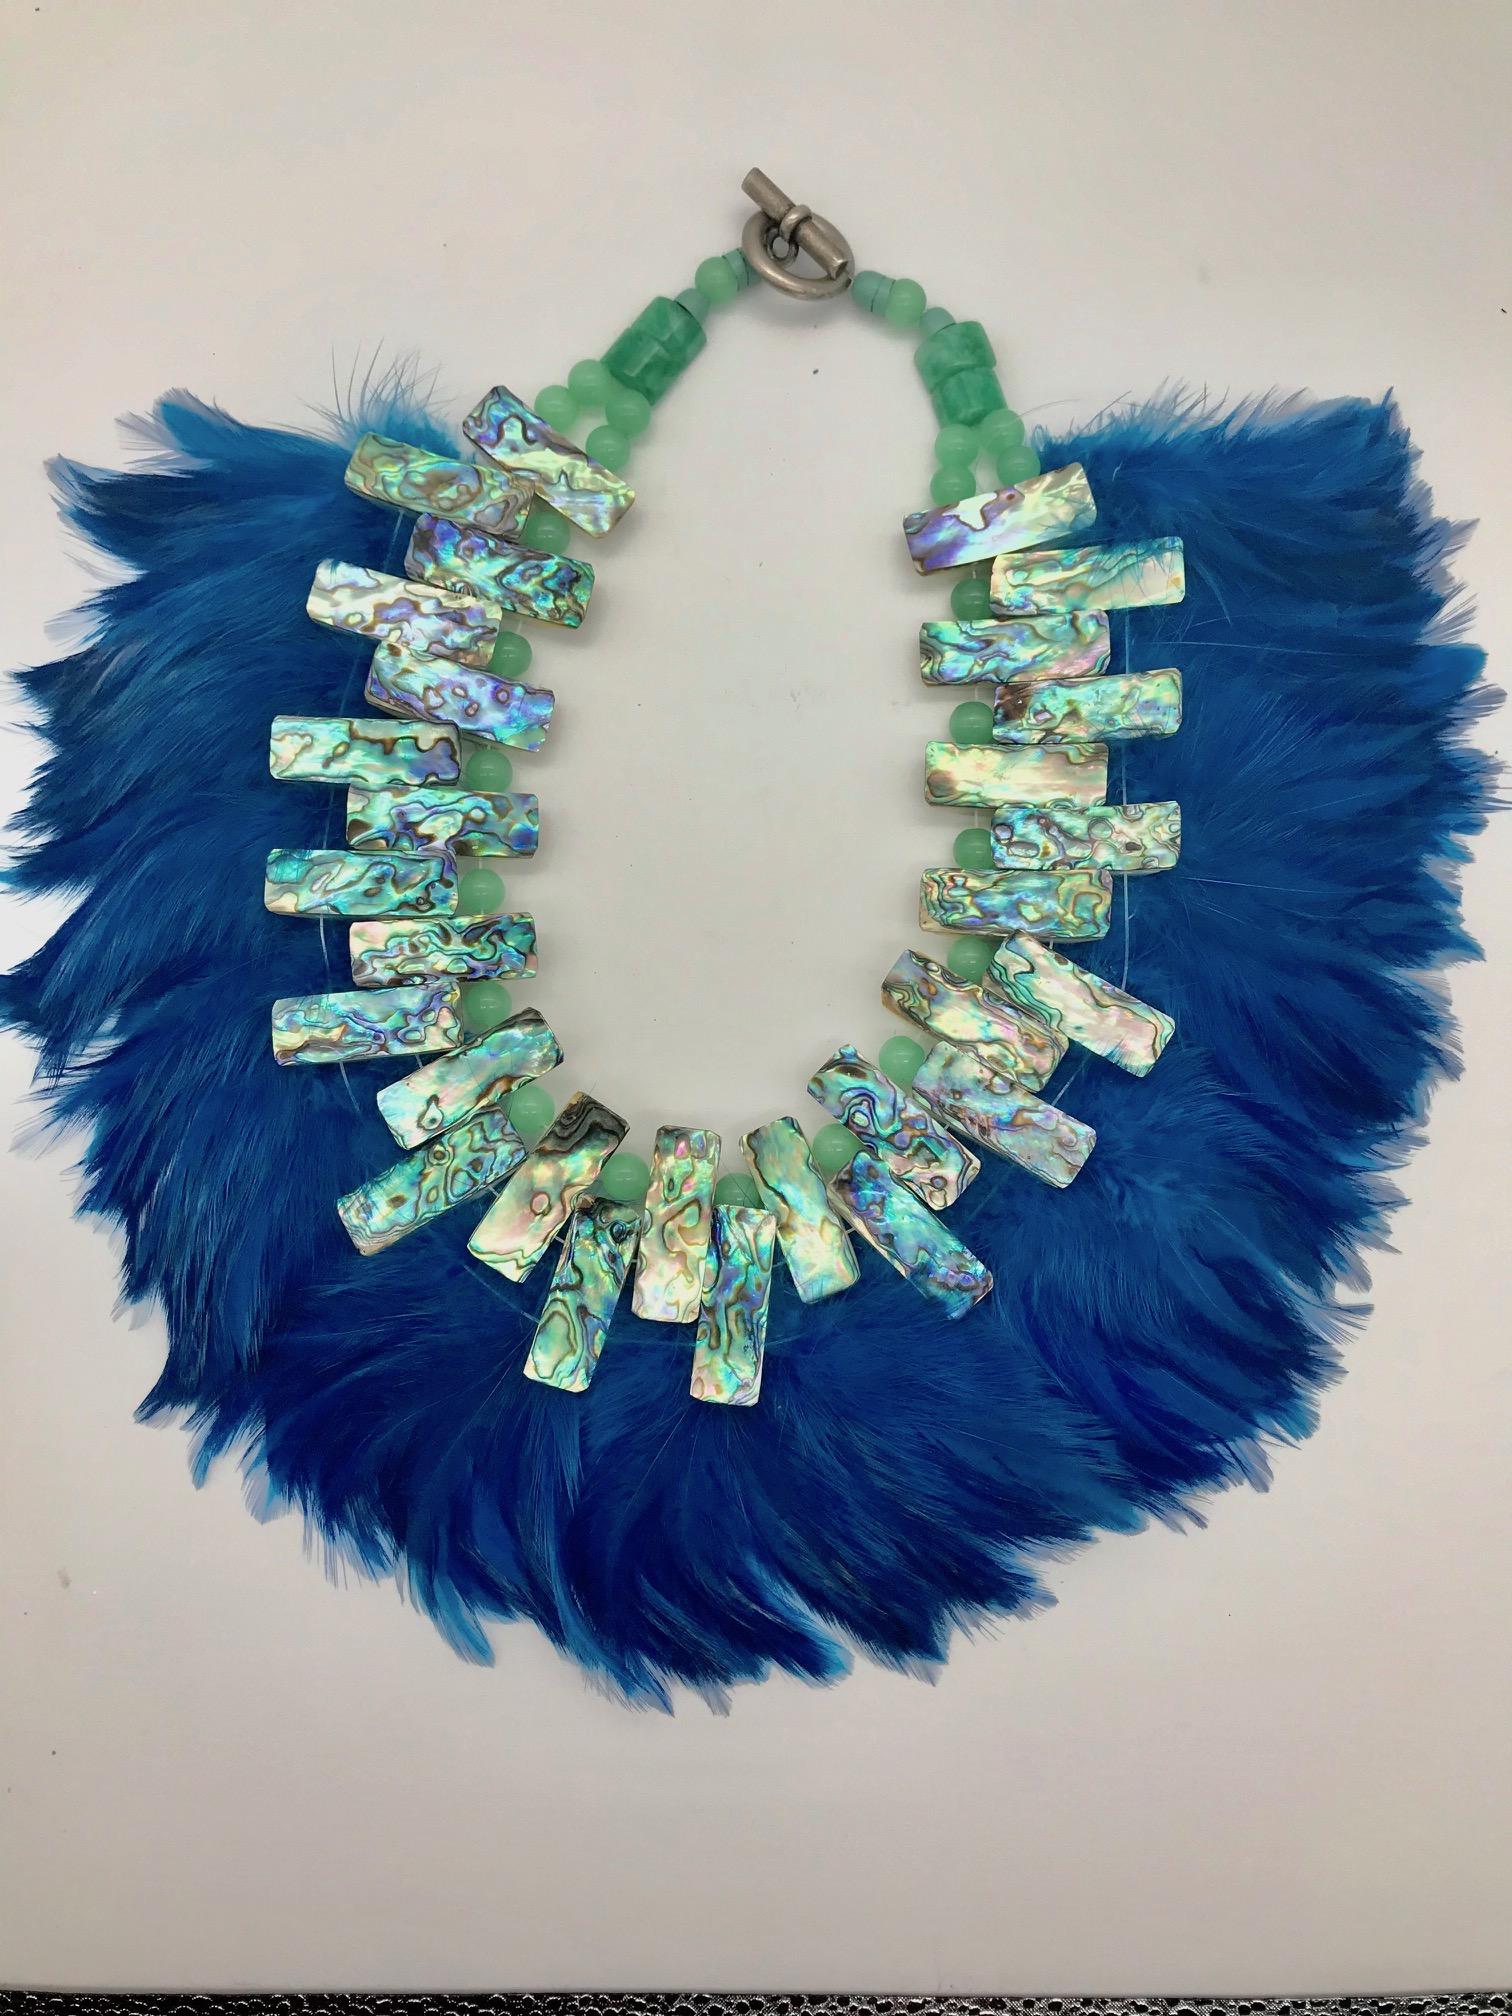 Paua /Abalone ,theatrical Statement Necklace was created for a theater in WDC. I was also worn at the Fashion Show in Sri Lanka during a Literary/Art Fest in Galle.This creation comprises beautifully iridescent Paua beads and royal blue